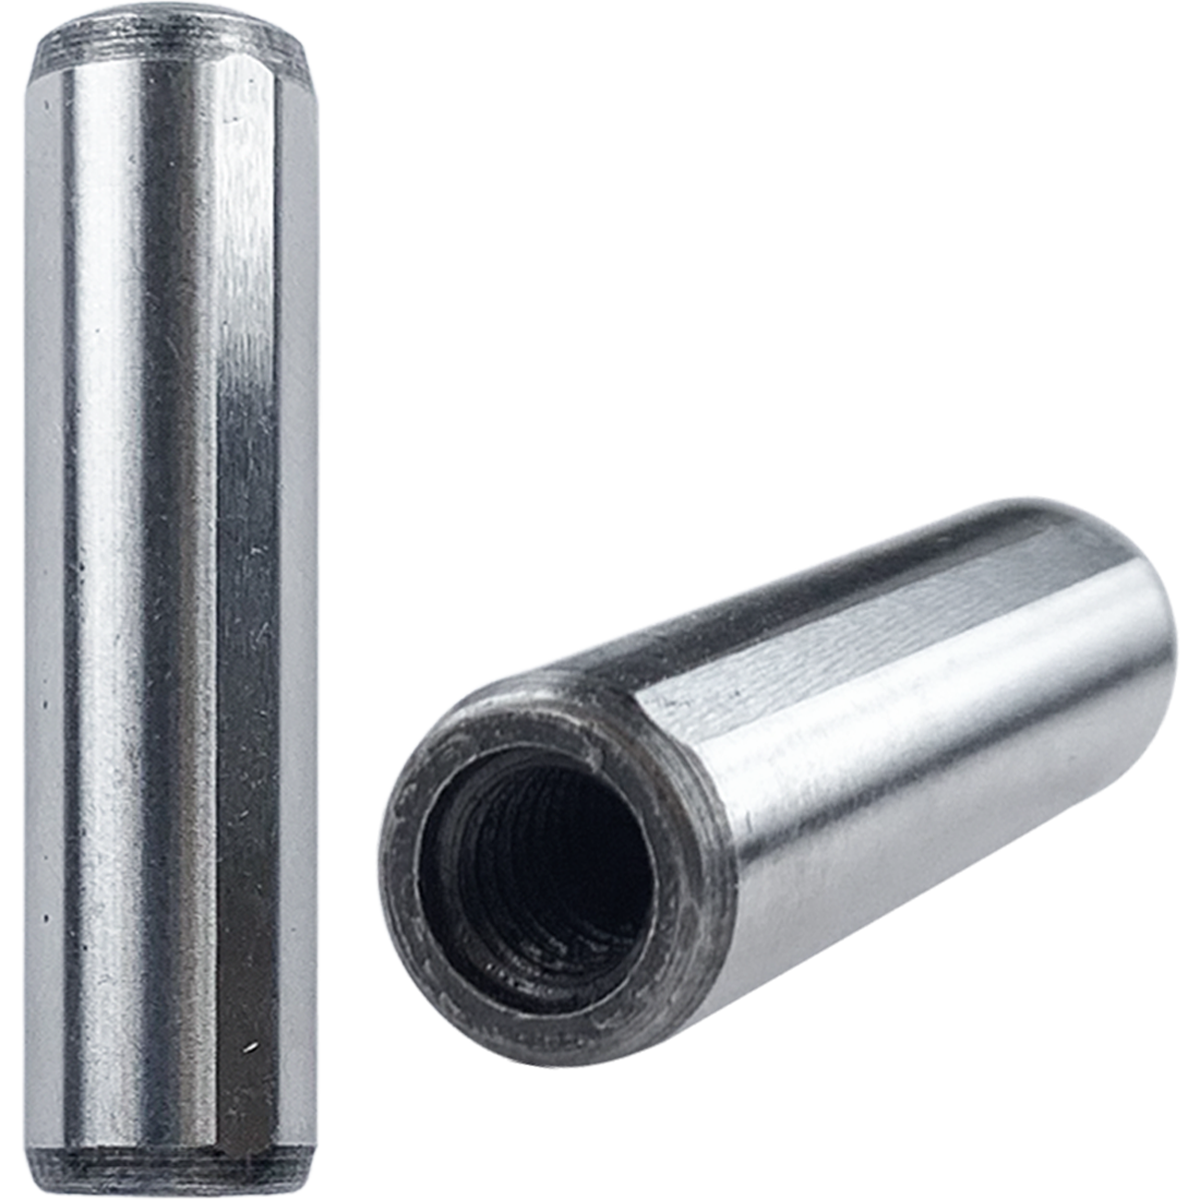 Extractable metal dowel pins, also known as retaining rod, locating pins.